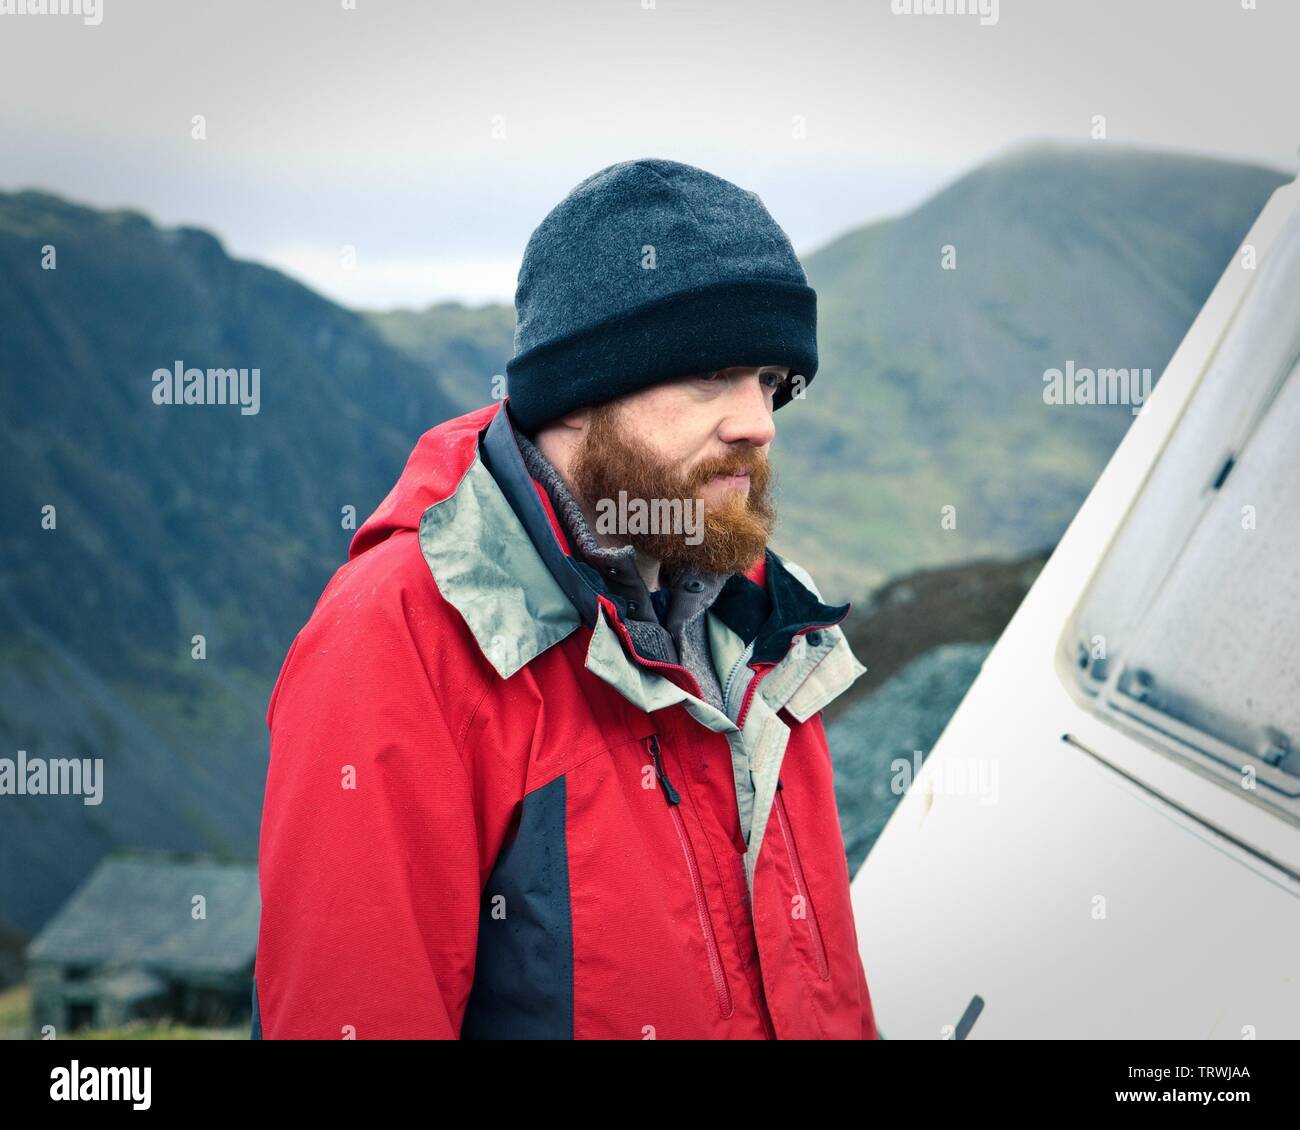 STEVE ORAM in SIGHTSEERS (2012). Copyright: Editorial use only. No merchandising or book covers. This is a publicly distributed handout. Access rights only, no license of copyright provided. Only to be reproduced in conjunction with promotion of this film. Credit: STUDIO CANAL / Album Stock Photo